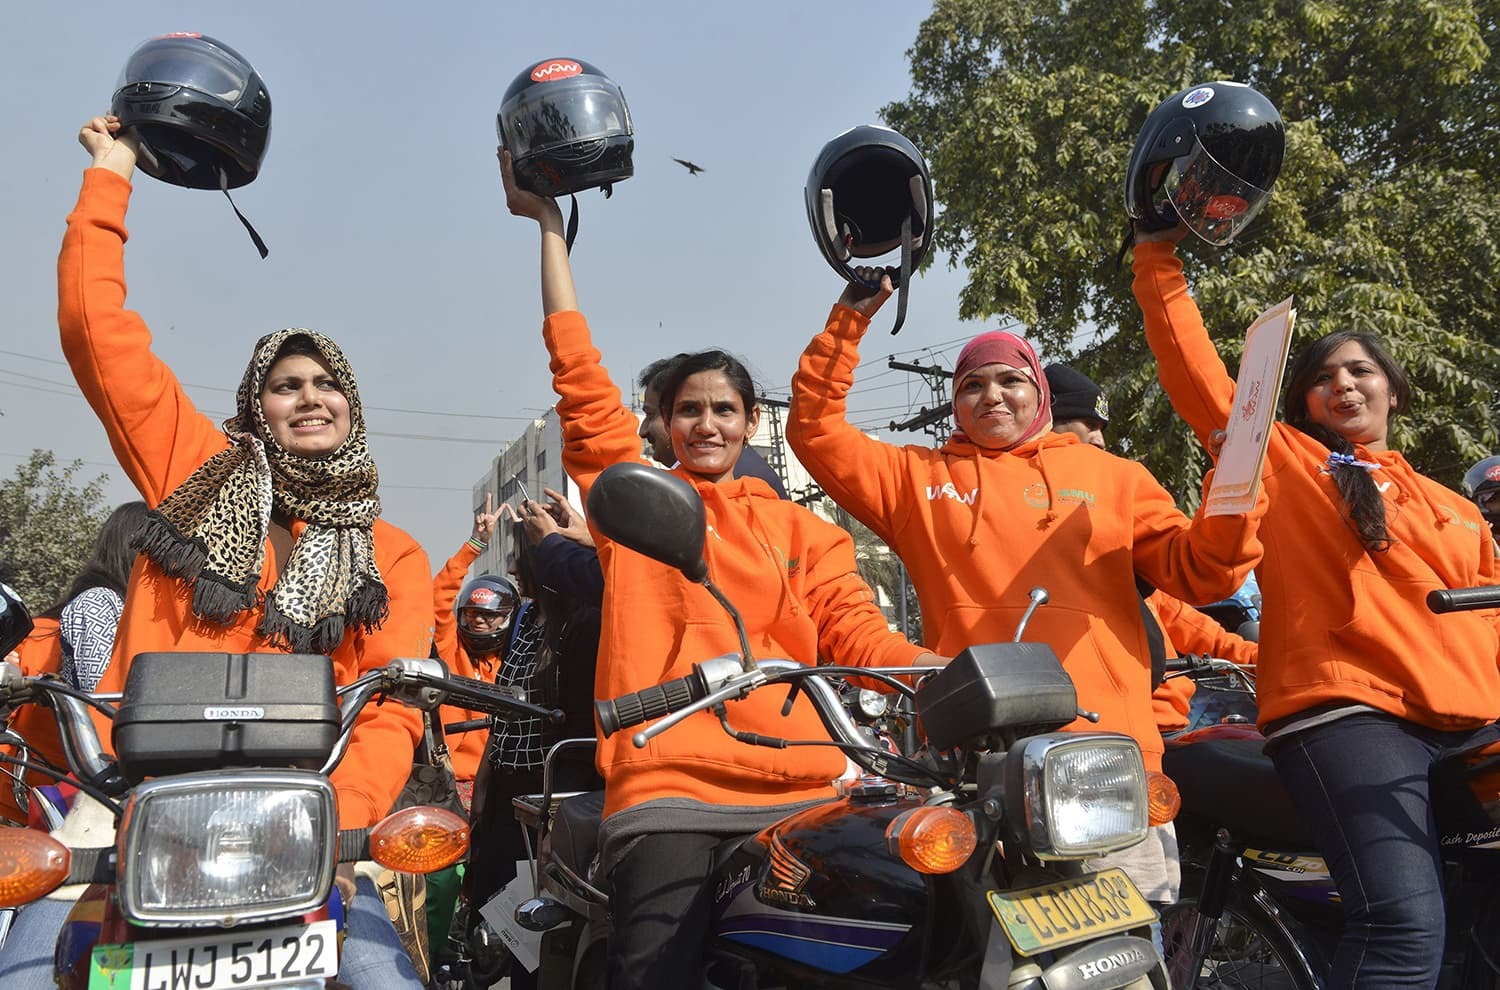 Women participants of Women on Wheels (WOW) raise their helmets at the start of a rally launching the Women on Wheels campaign in Lahore on January 10, 2016. AFP PHOTO / Arif ALI